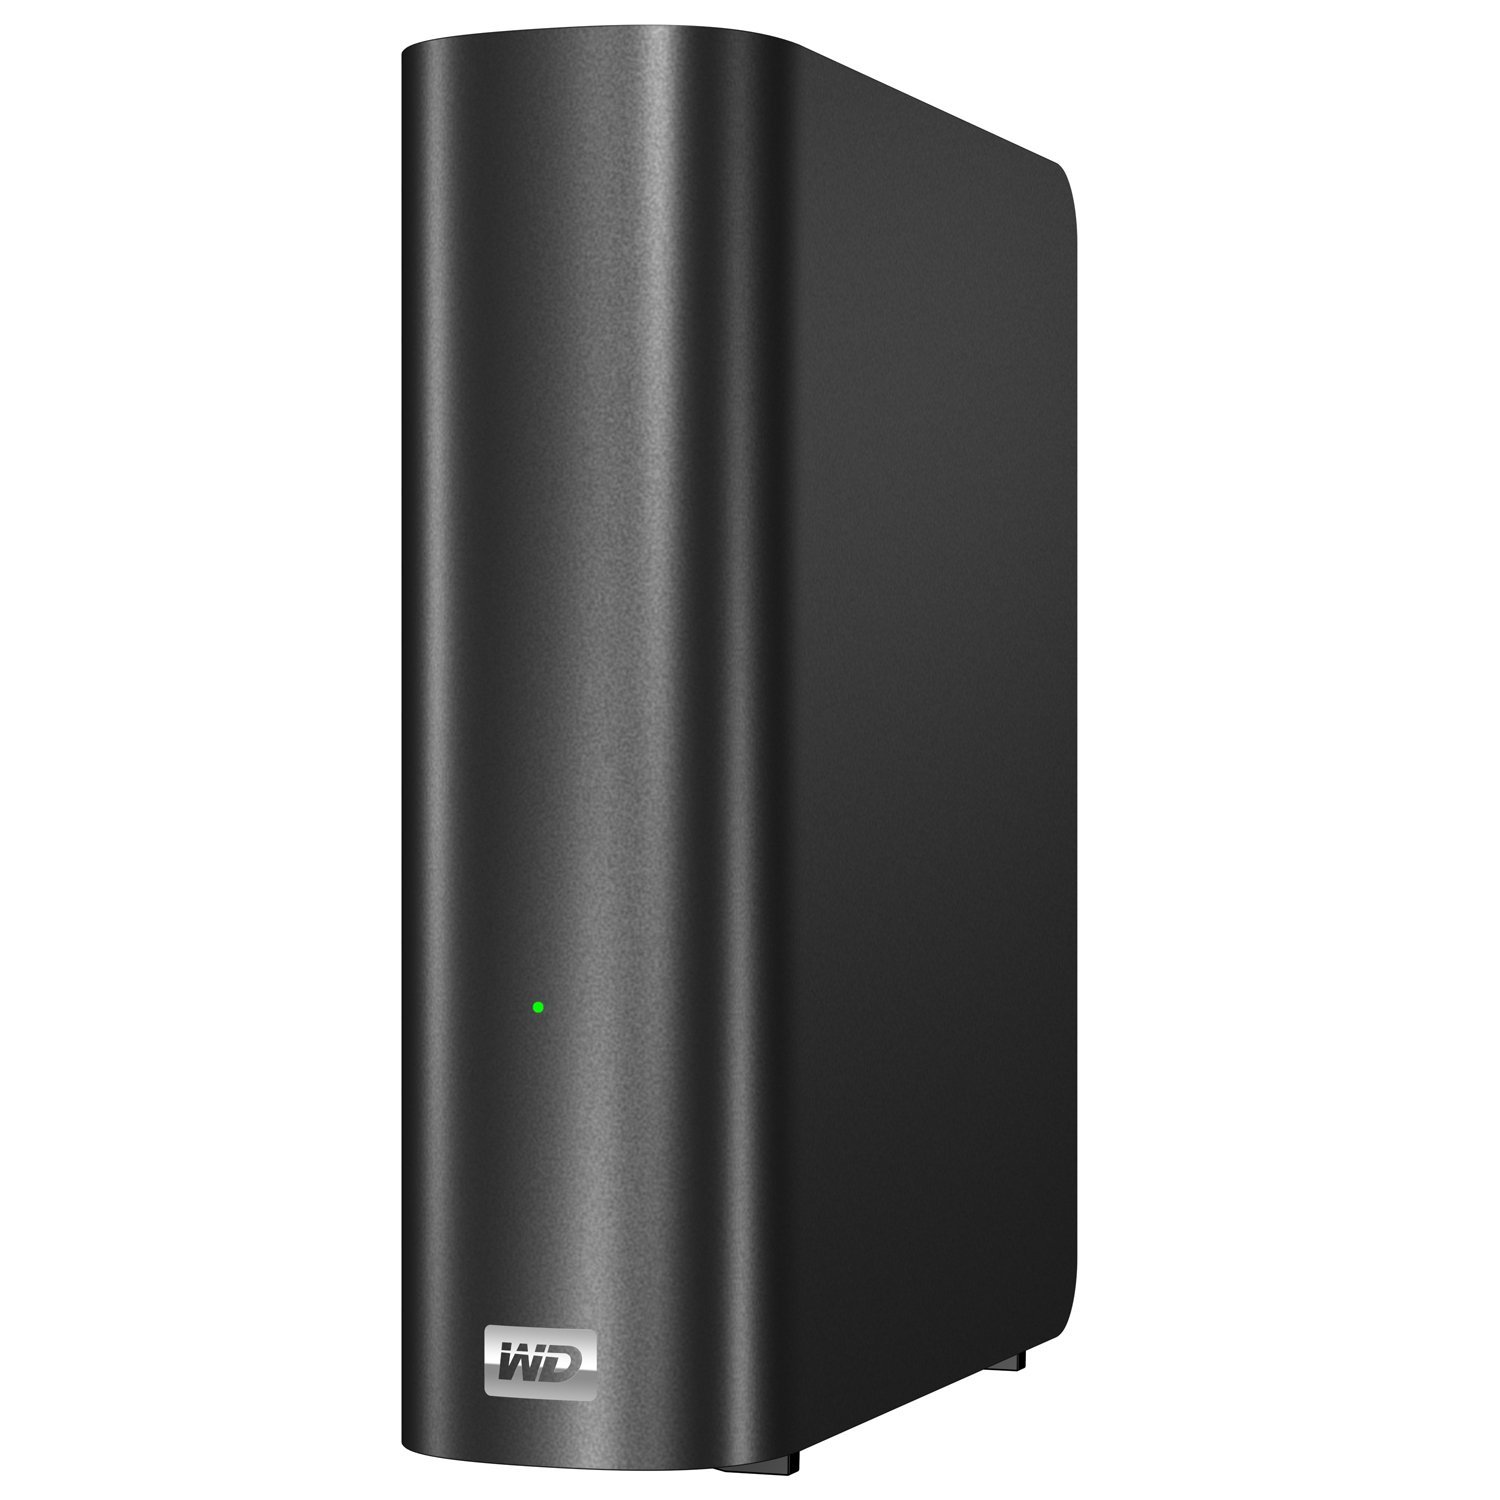 http://thetechjournal.com/wp-content/uploads/images/1201/1325610079-western-digital-my-book-live-2-tb-personal-cloud-storage-drive-1.jpg